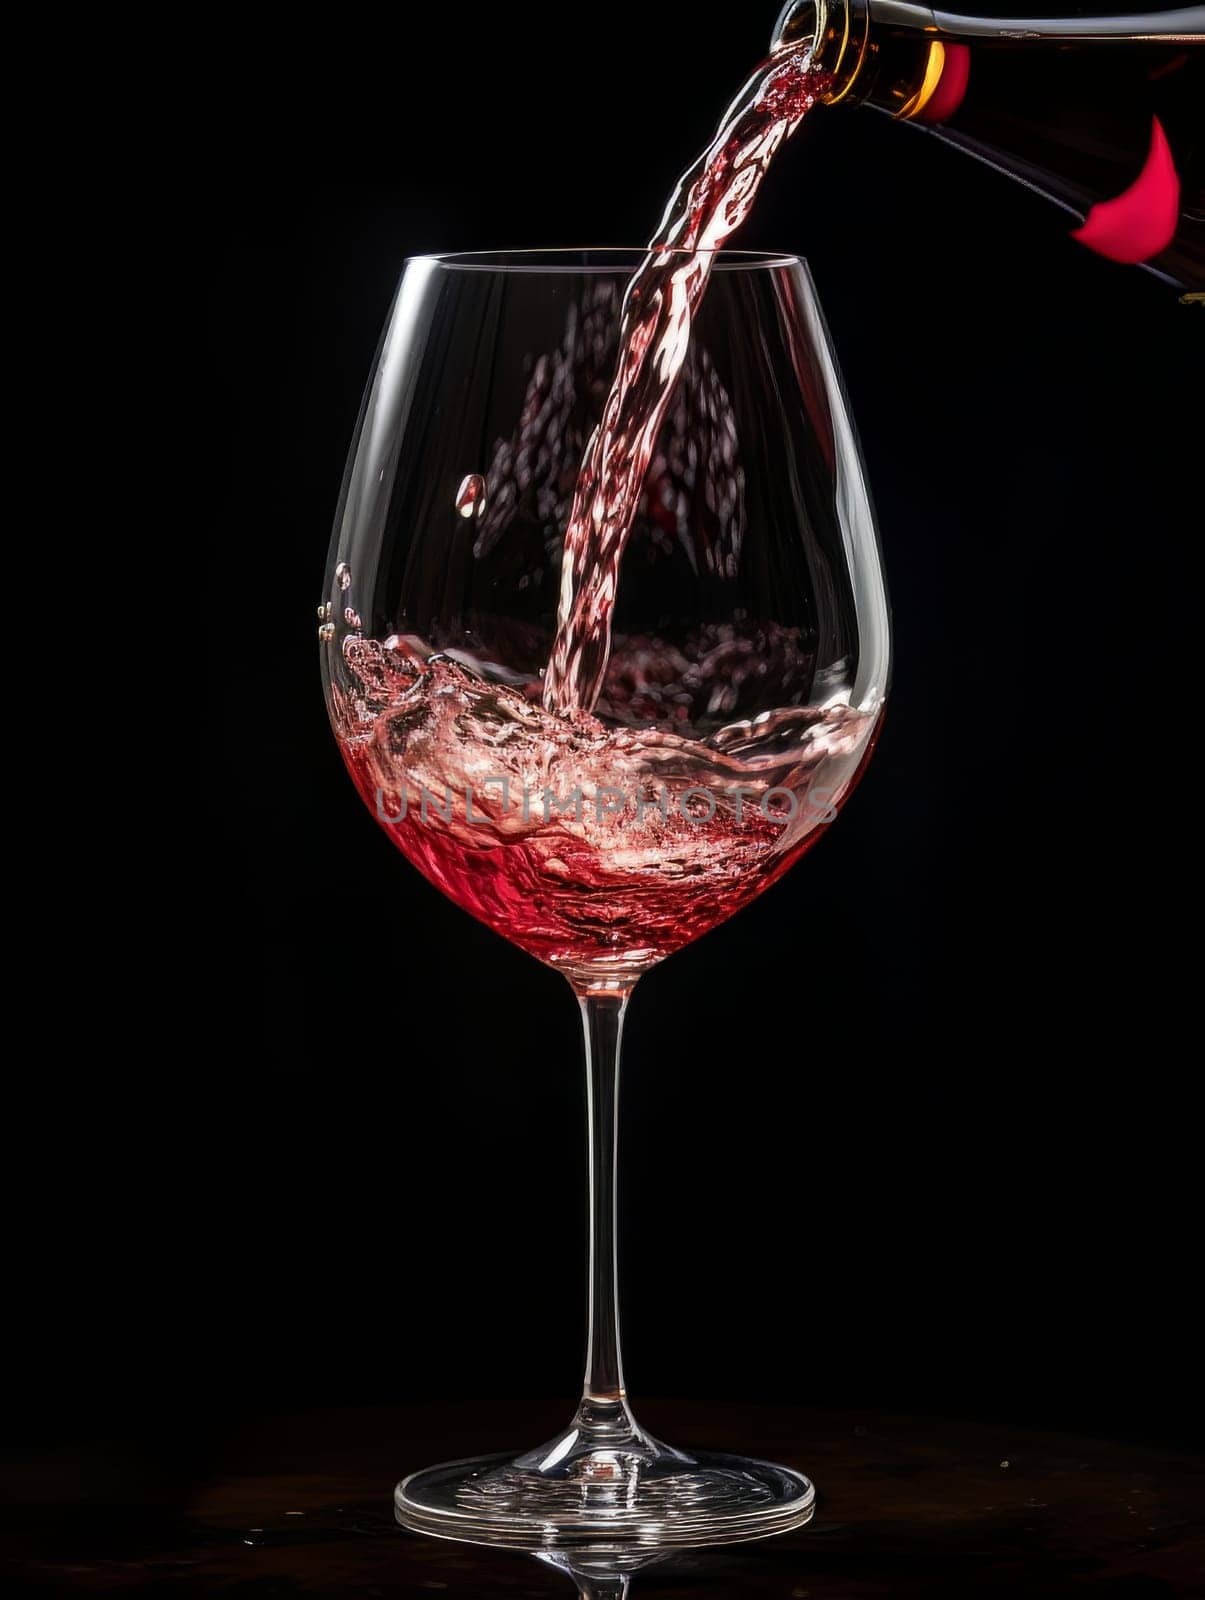 Red wine pours from a bottle into a glass AI by but_photo